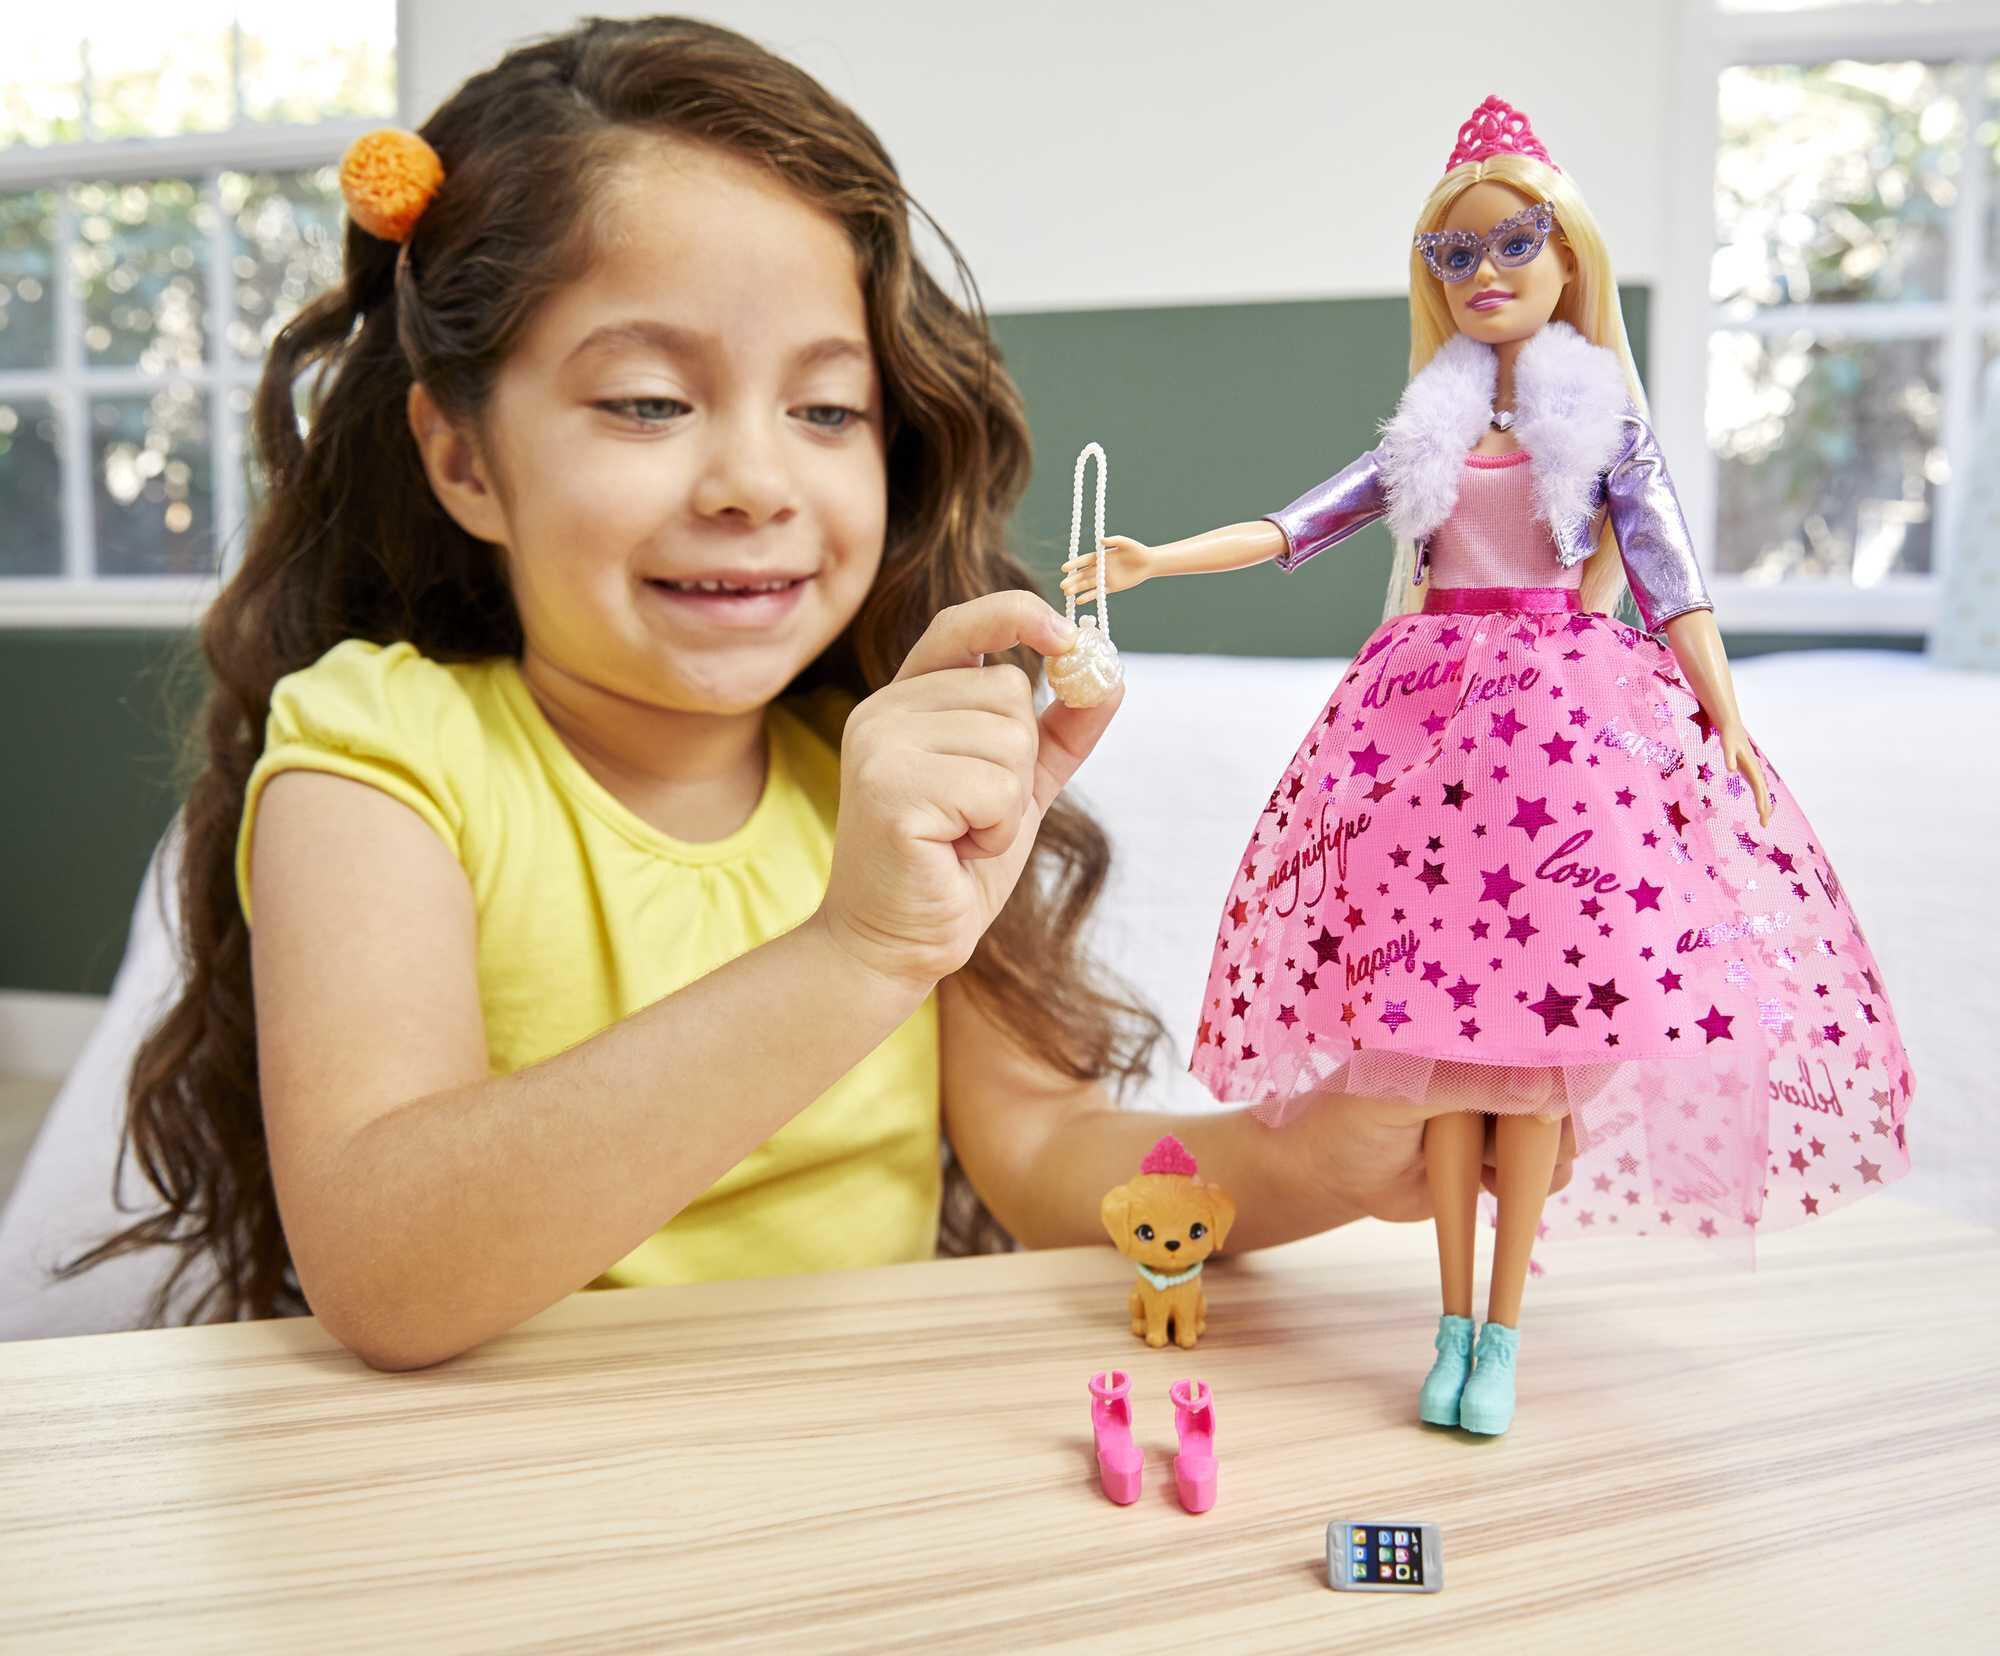 Barbie Dreamtopia Doll & Accessories, Blonde Doll with Star Skirt, Pet Puppy & Fashion Accessories, 3 to 7 Years - image 3 of 7